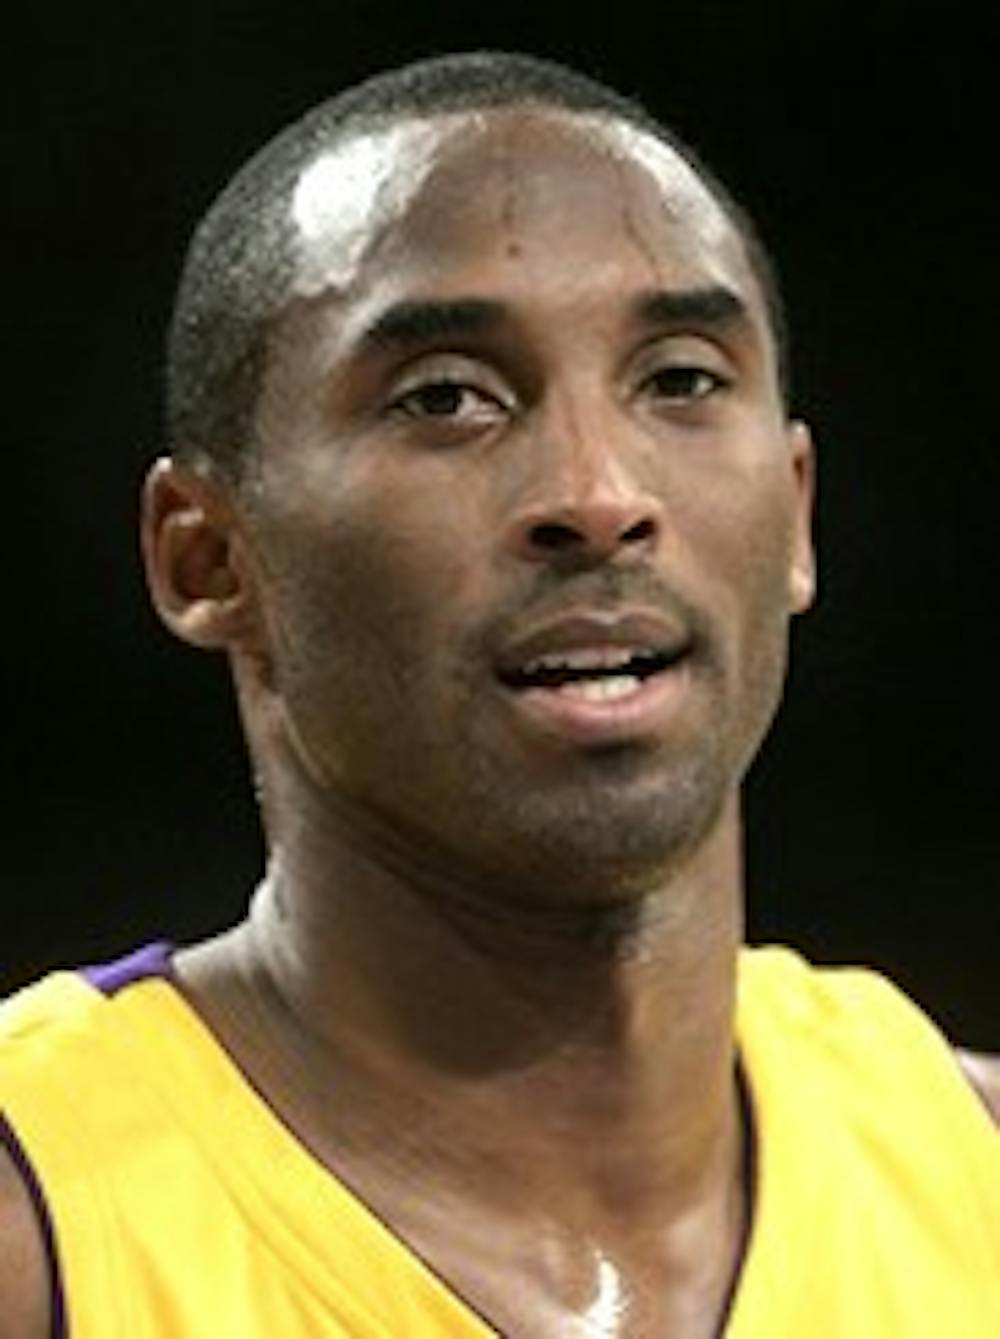 **FILE** Los Angeles Lakers' Kobe Bryant is seen during a basketball game against the Houston Rockets in Los Angeles in this Oct. 30, 2007 file photo. Chicago Bulls general manager John Paxson basically squashed the notion that Bryant will wind up in Chicago, saying, Thursday, Nov. 1, 2007, the teams were never on the verge of a deal and talks were over for now.(AP Photo/Matt Sayles)